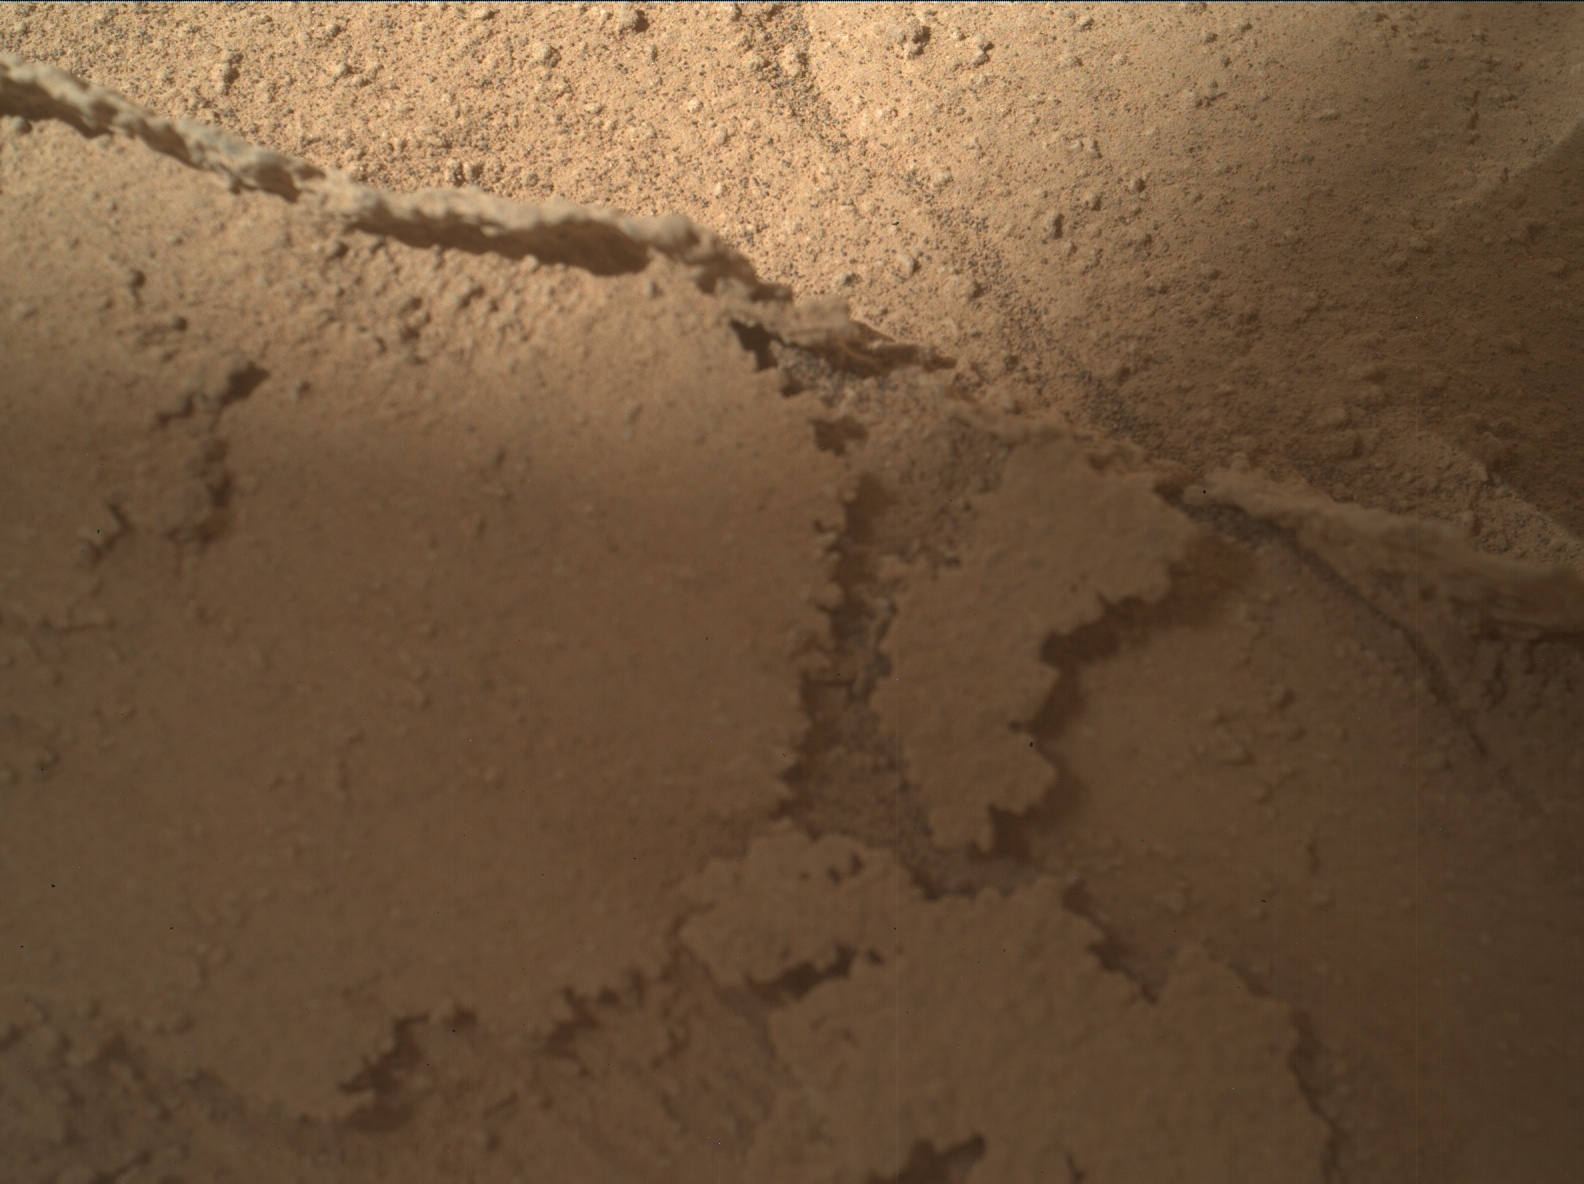 Nasa's Mars rover Curiosity acquired this image using its Mars Hand Lens Imager (MAHLI) on Sol 3873